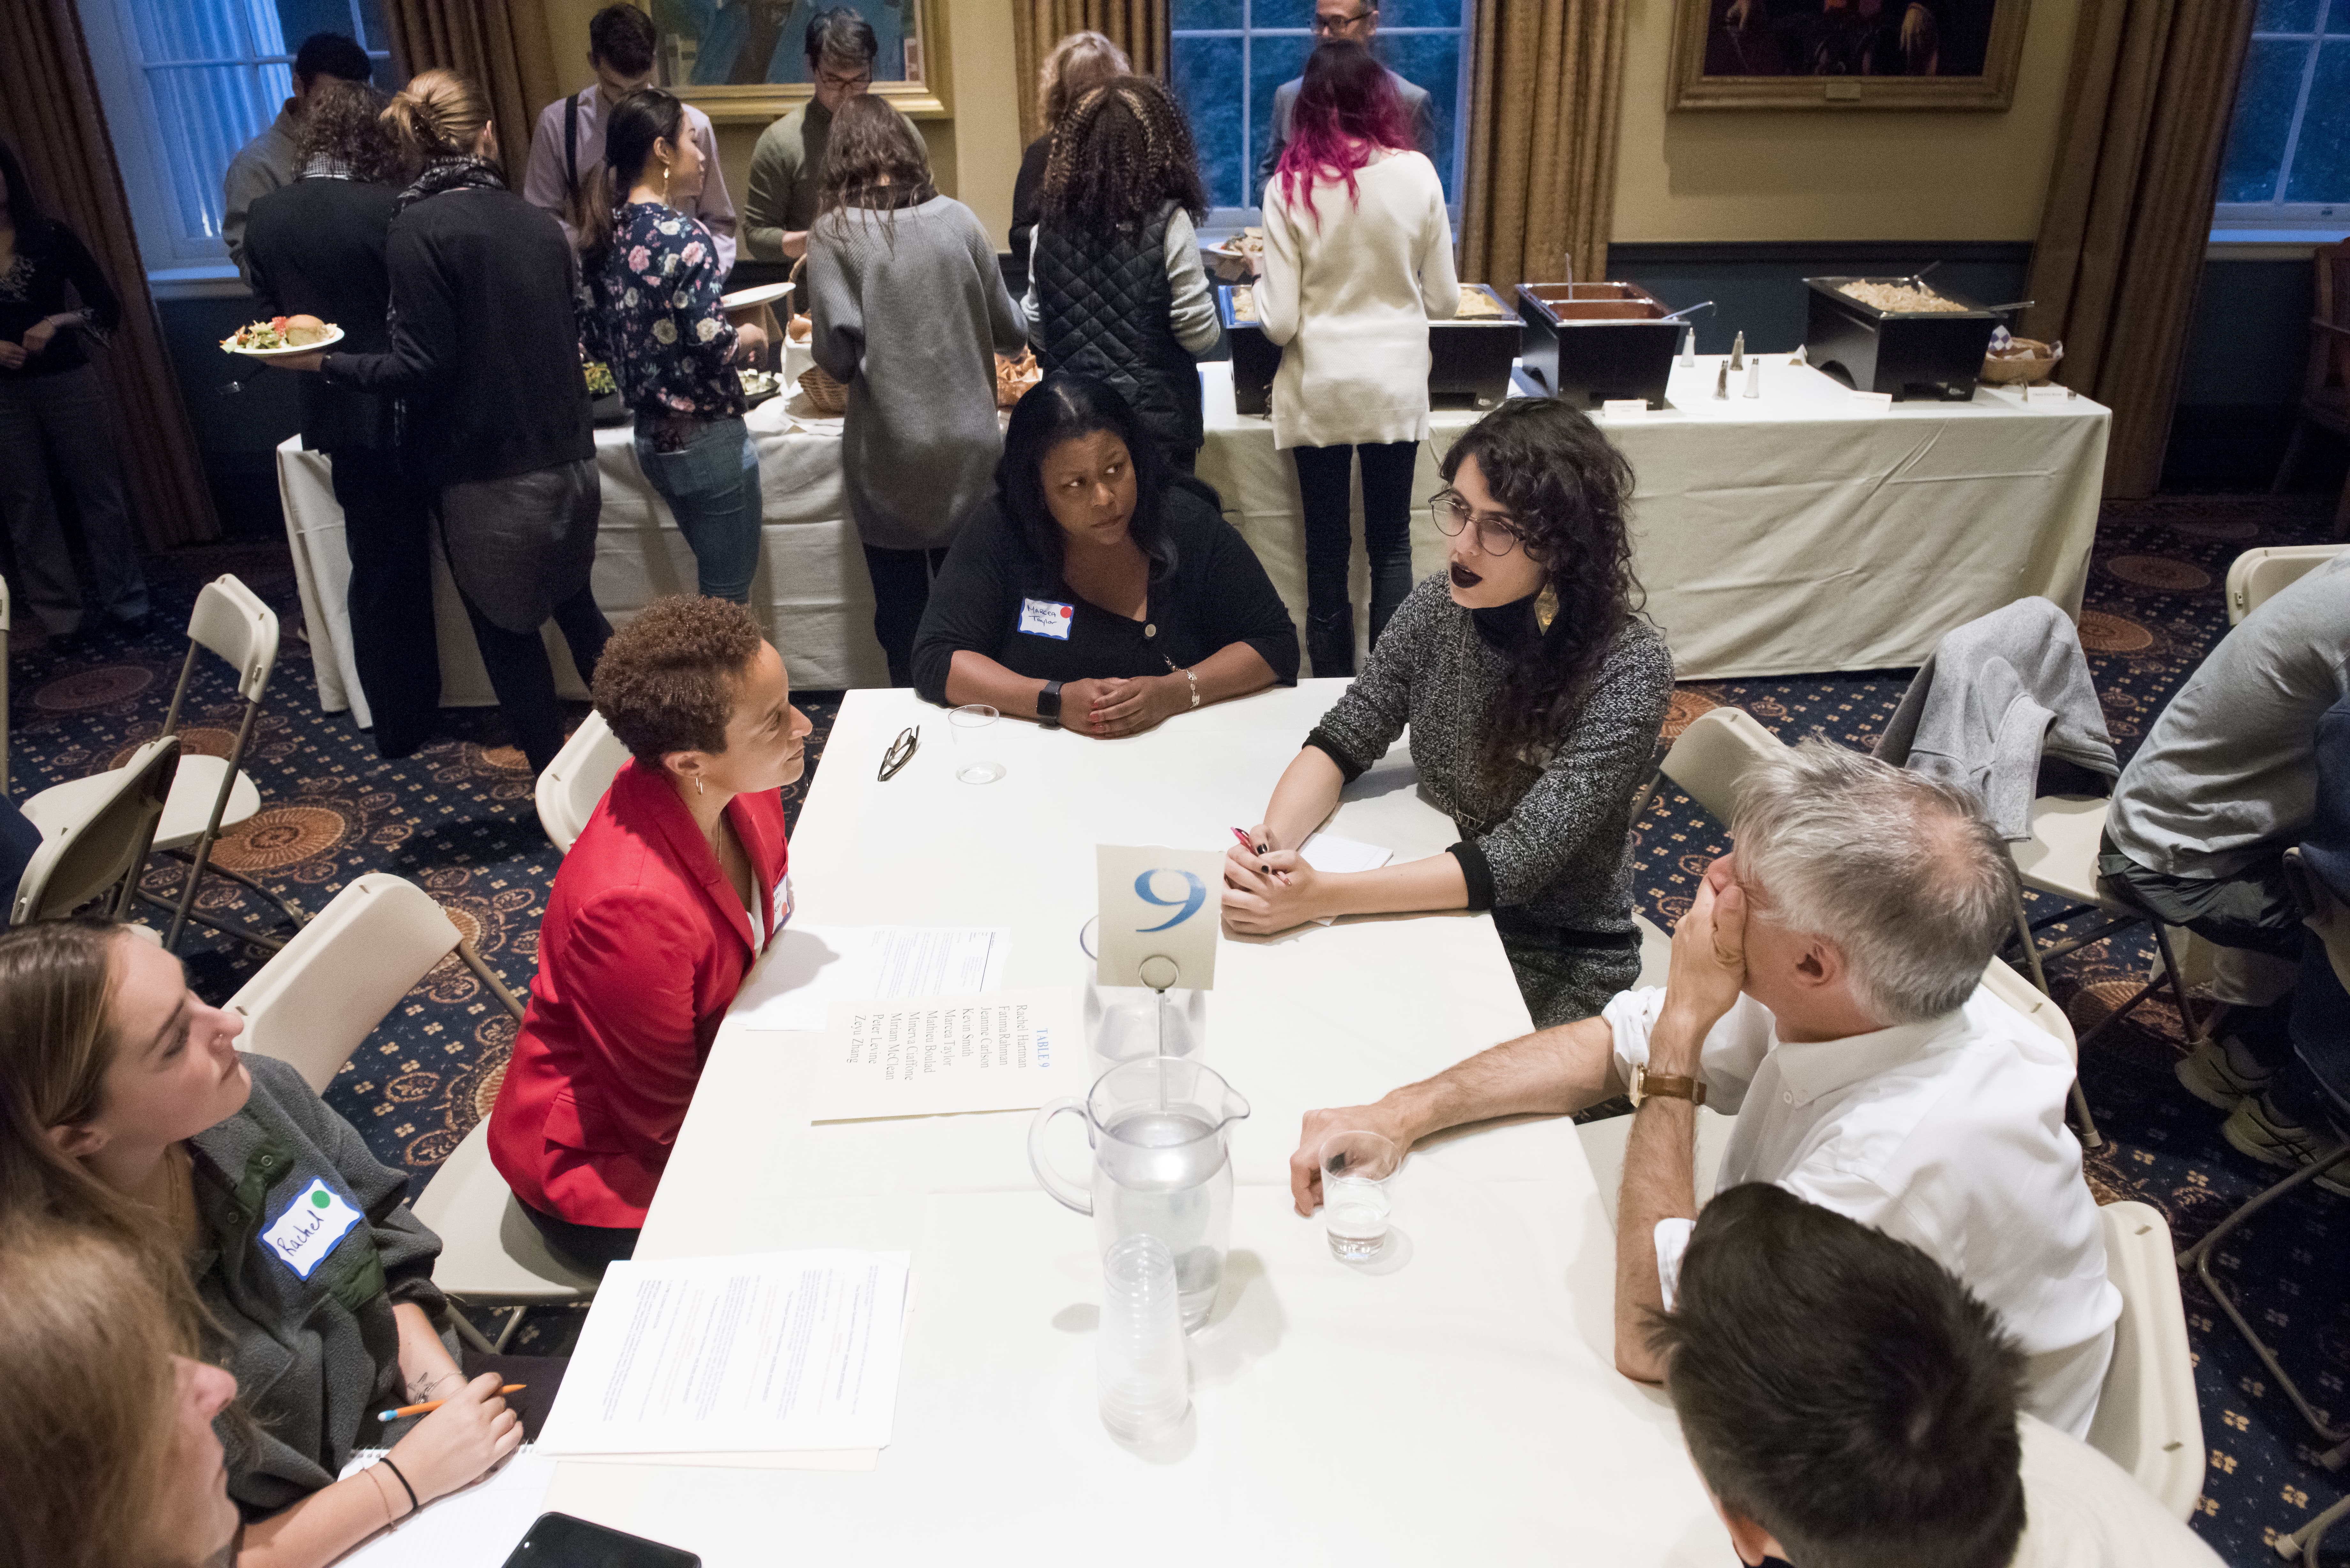 Tufts students, faculty, and staff gather to discuss topics at the first Tufts Table.